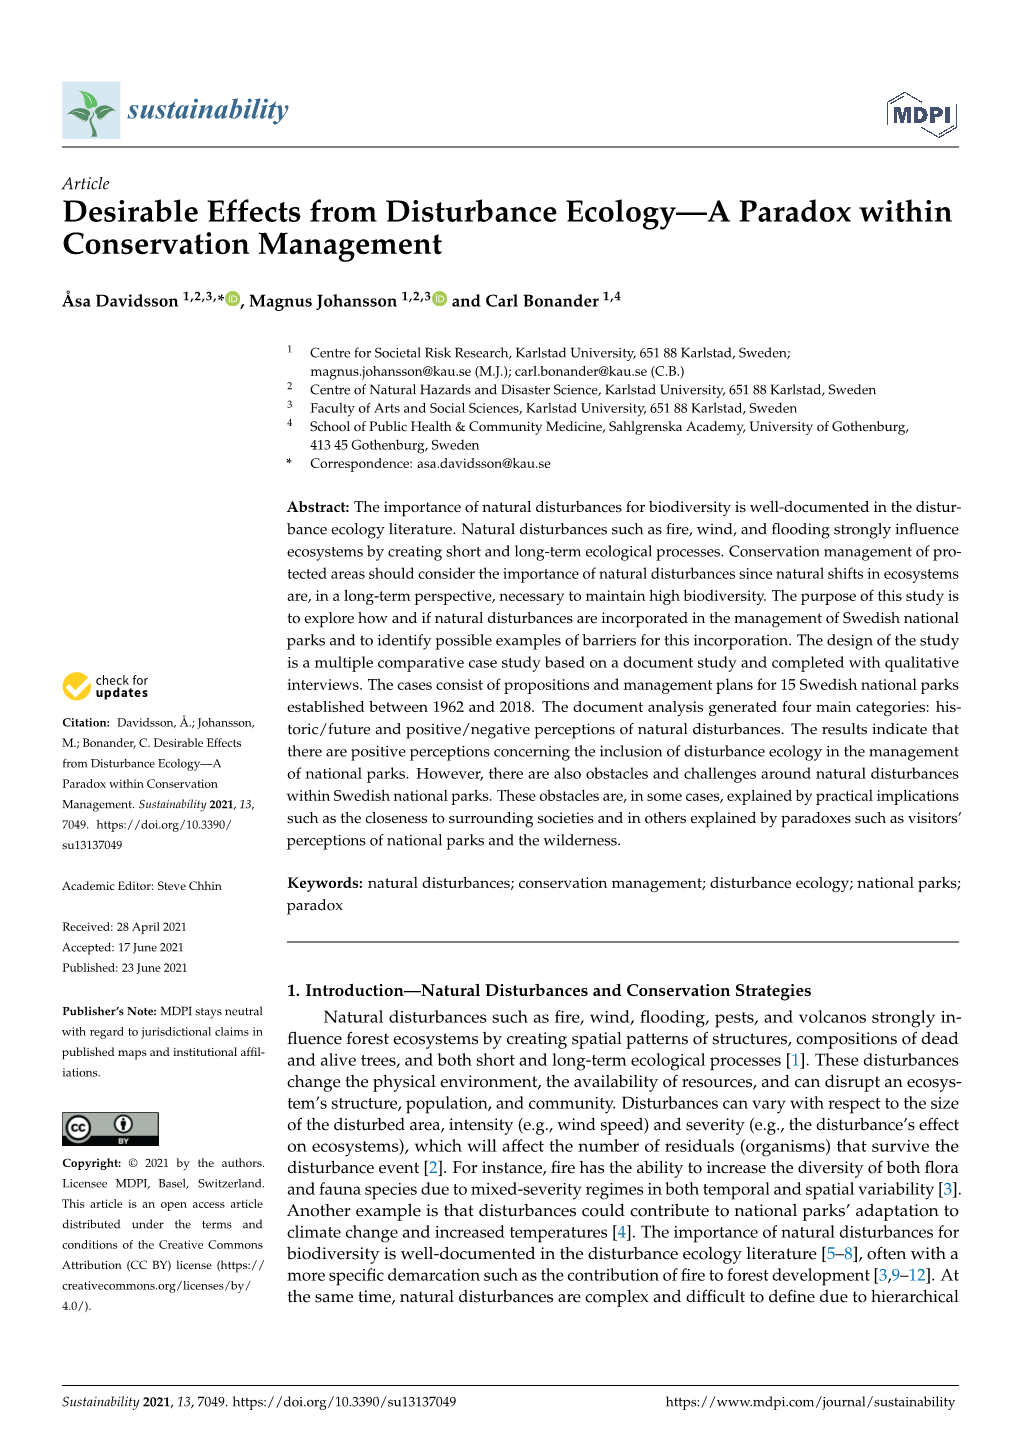 Desirable Effects from Disturbance Ecology—A Paradox Within Conservation Management